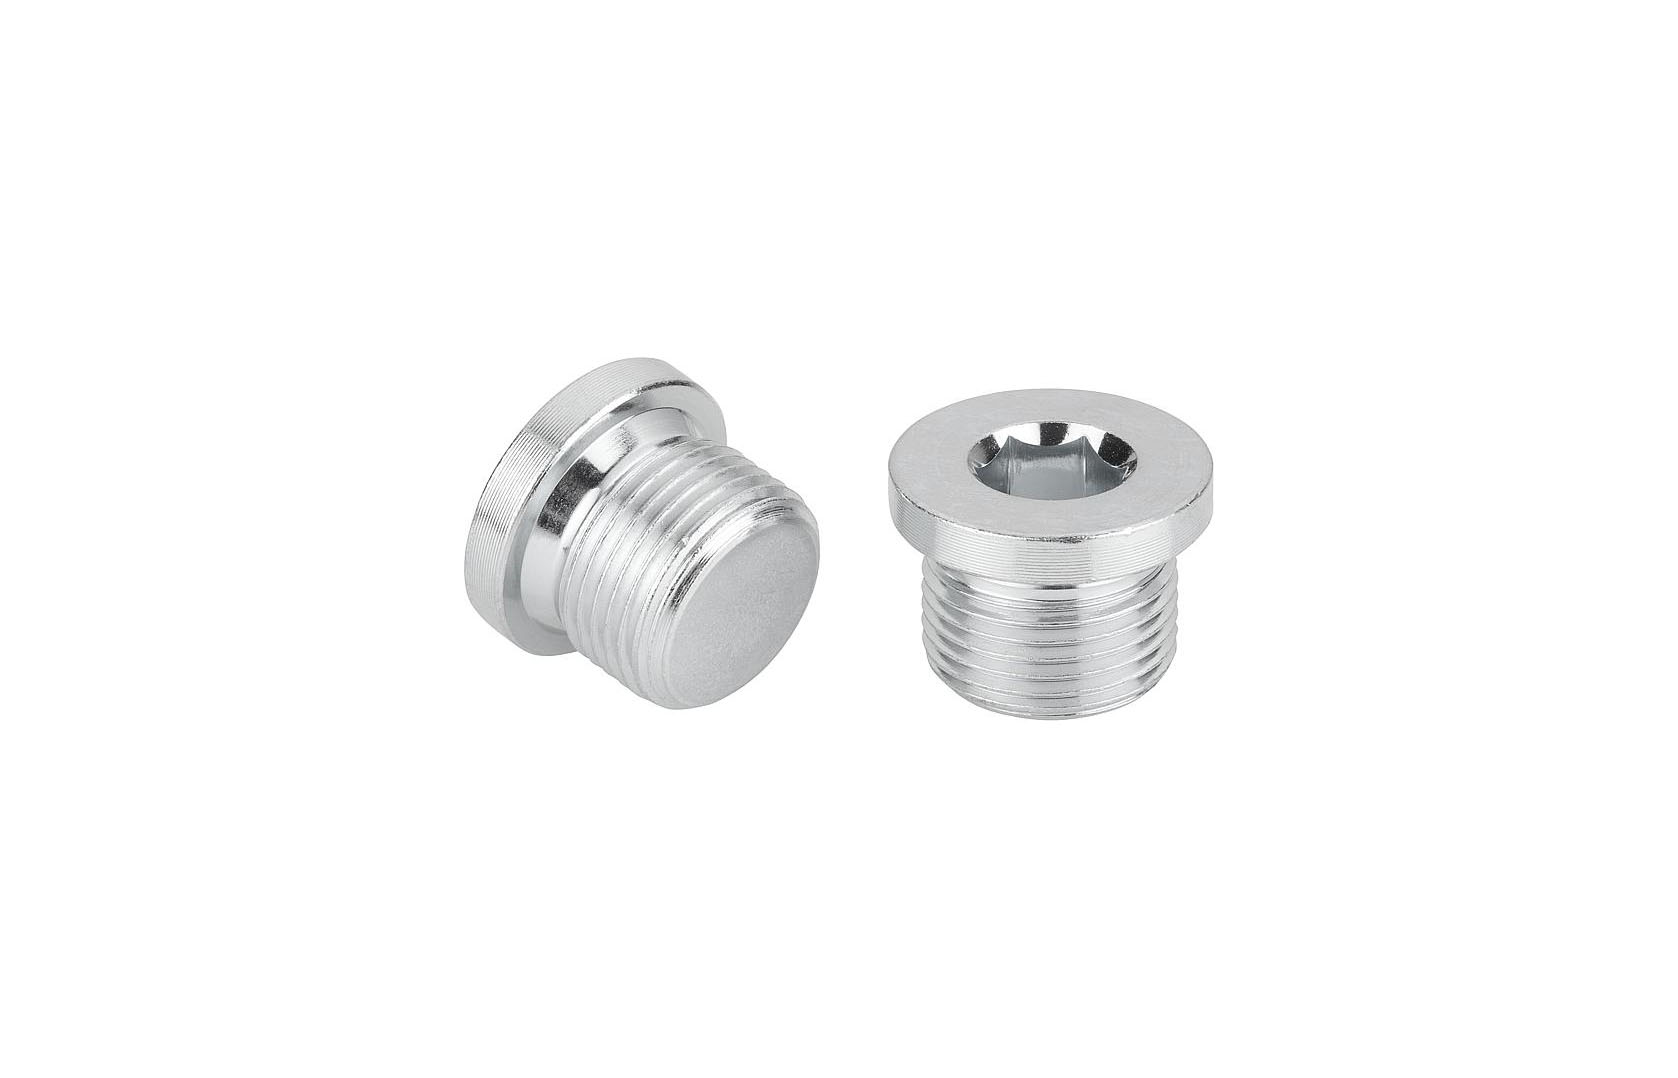 K1130_Screw plugs with collar and hexagon socket DIN 908